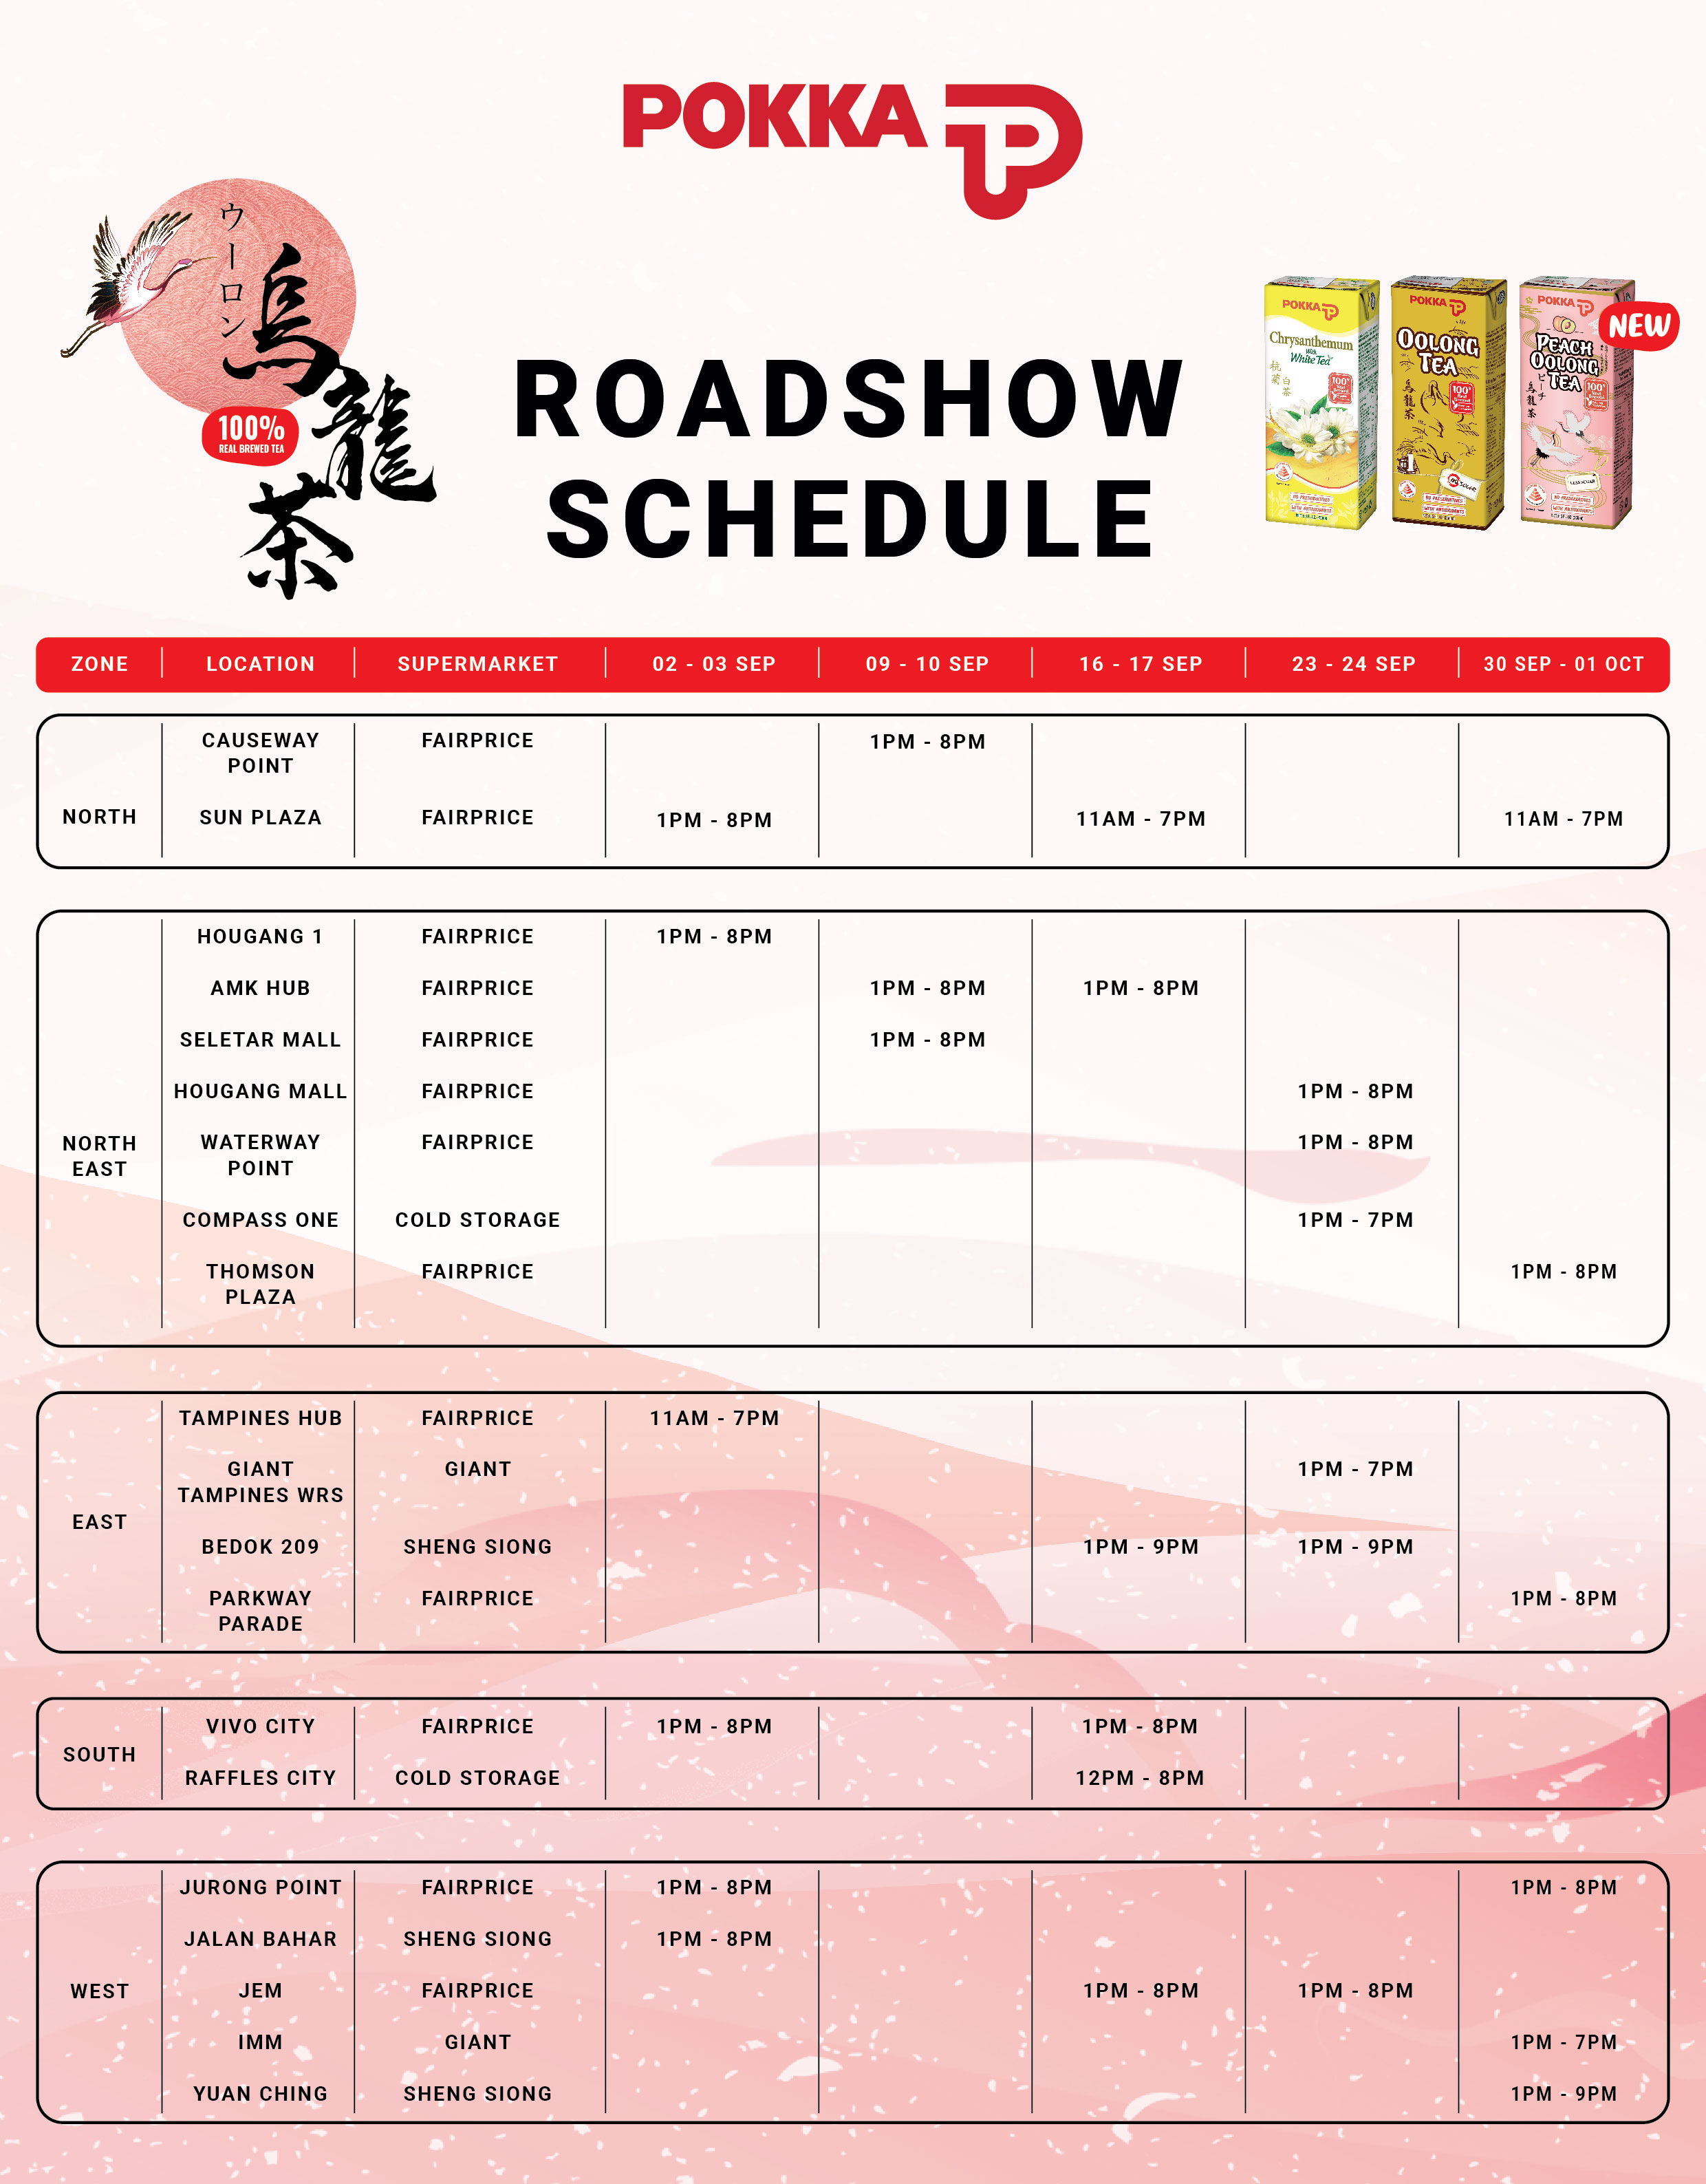 Roadshow Schedule (Updated as of 14 Sept)